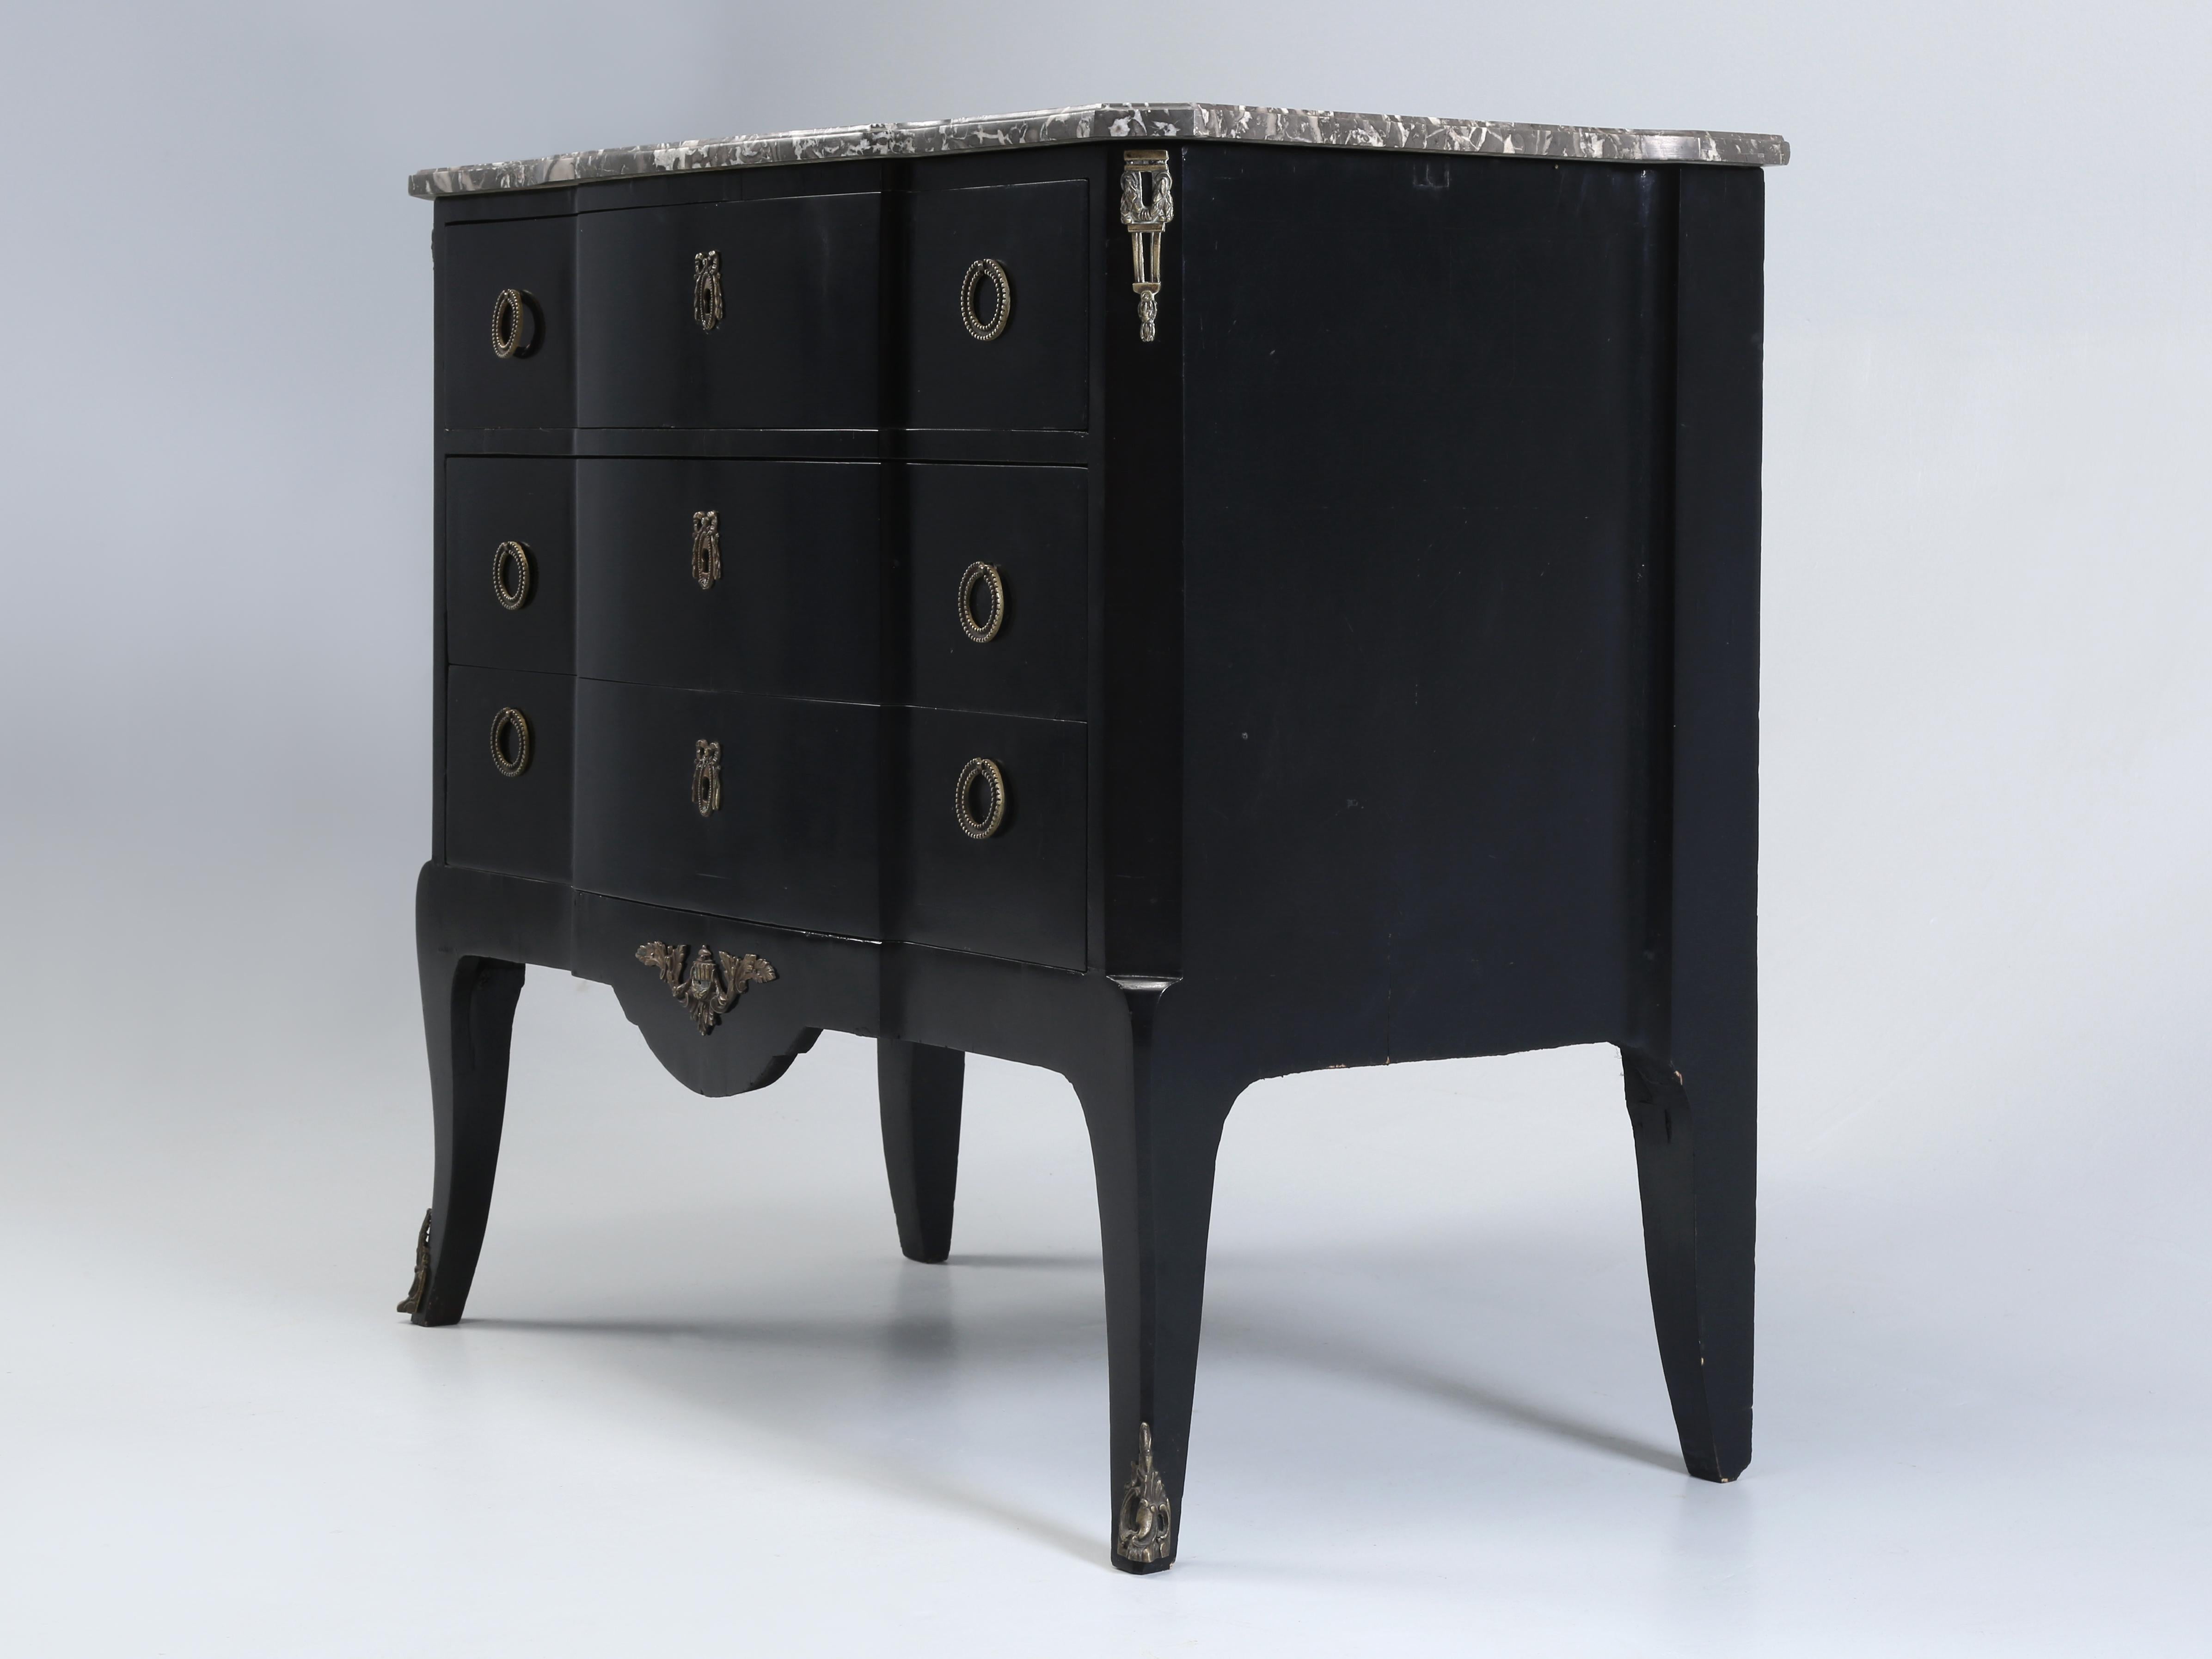 Antique French Ebonized Louis XV Style Commode or French Dresser that just came out of our Restoration department and is ready for immediate delivery. Our Antique Ebonized French Commode was stripped down to the bare wood and an old-fashioned black